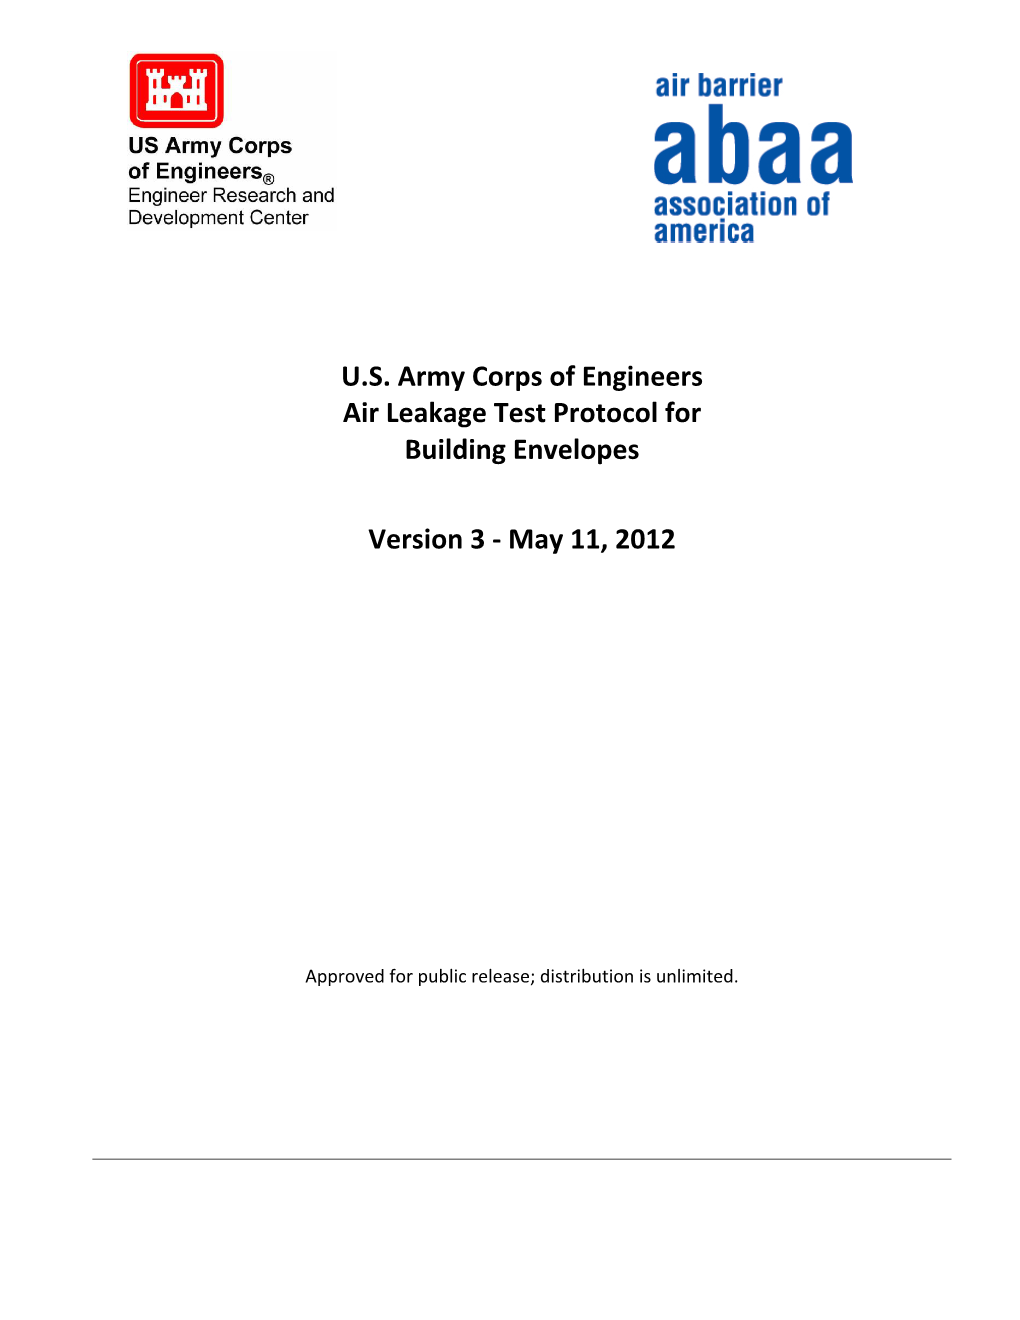 USACE Air Leakage Test Protocol for Building Envelopes – Version 3: 2012-05-11 ______1______